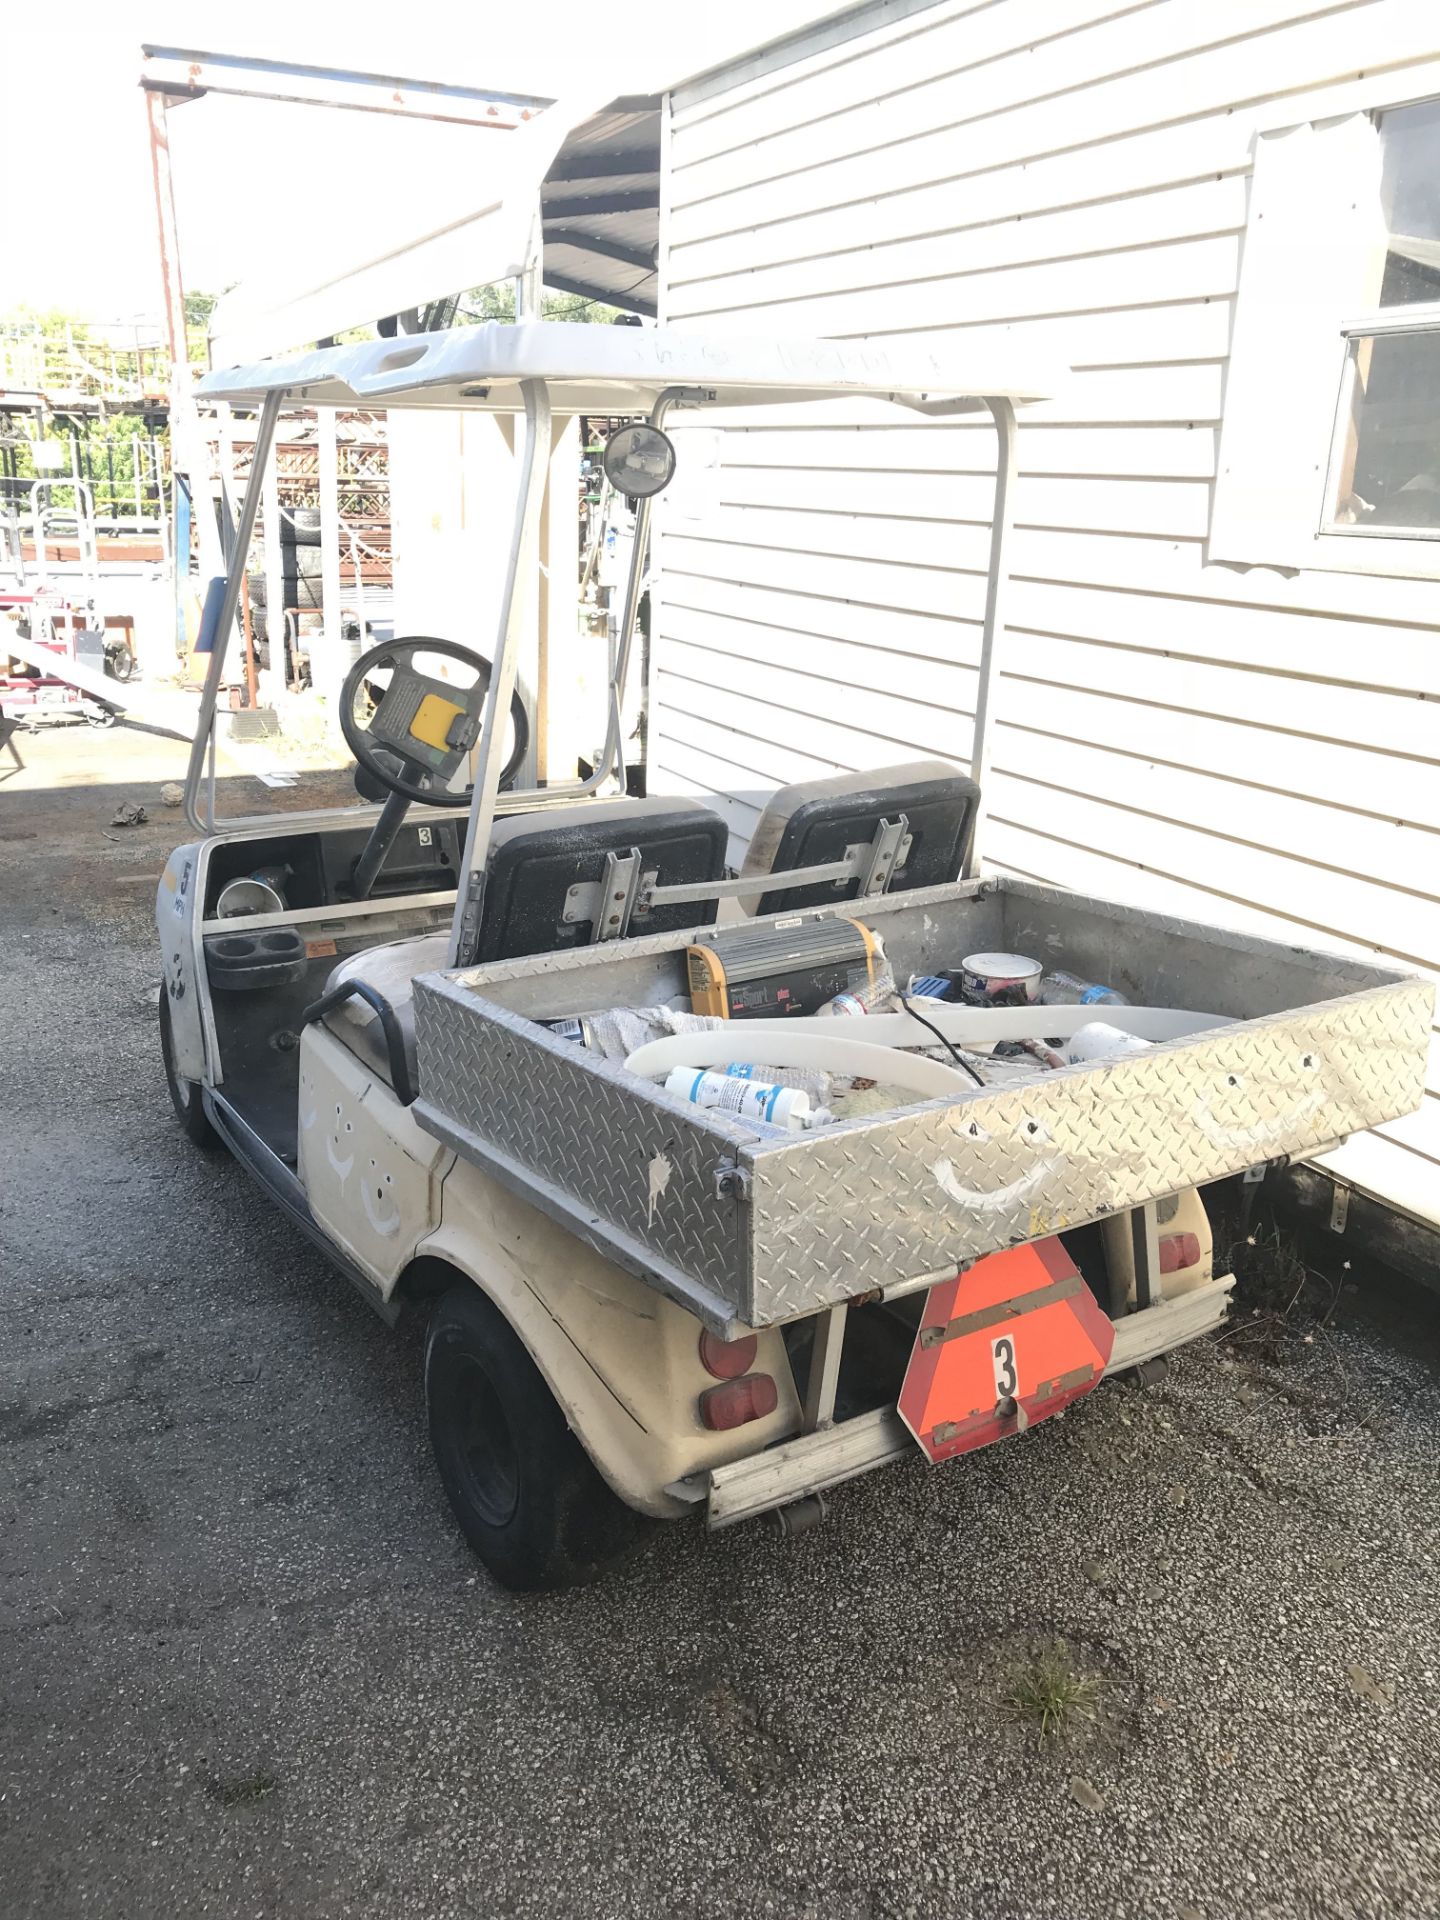 CLUB CAR ELECTRIC GOLF CART; S/N A9435-398658, 30" X 42" WORK BED **LOCATED AT 350 SEA RAY DR., - Image 2 of 5